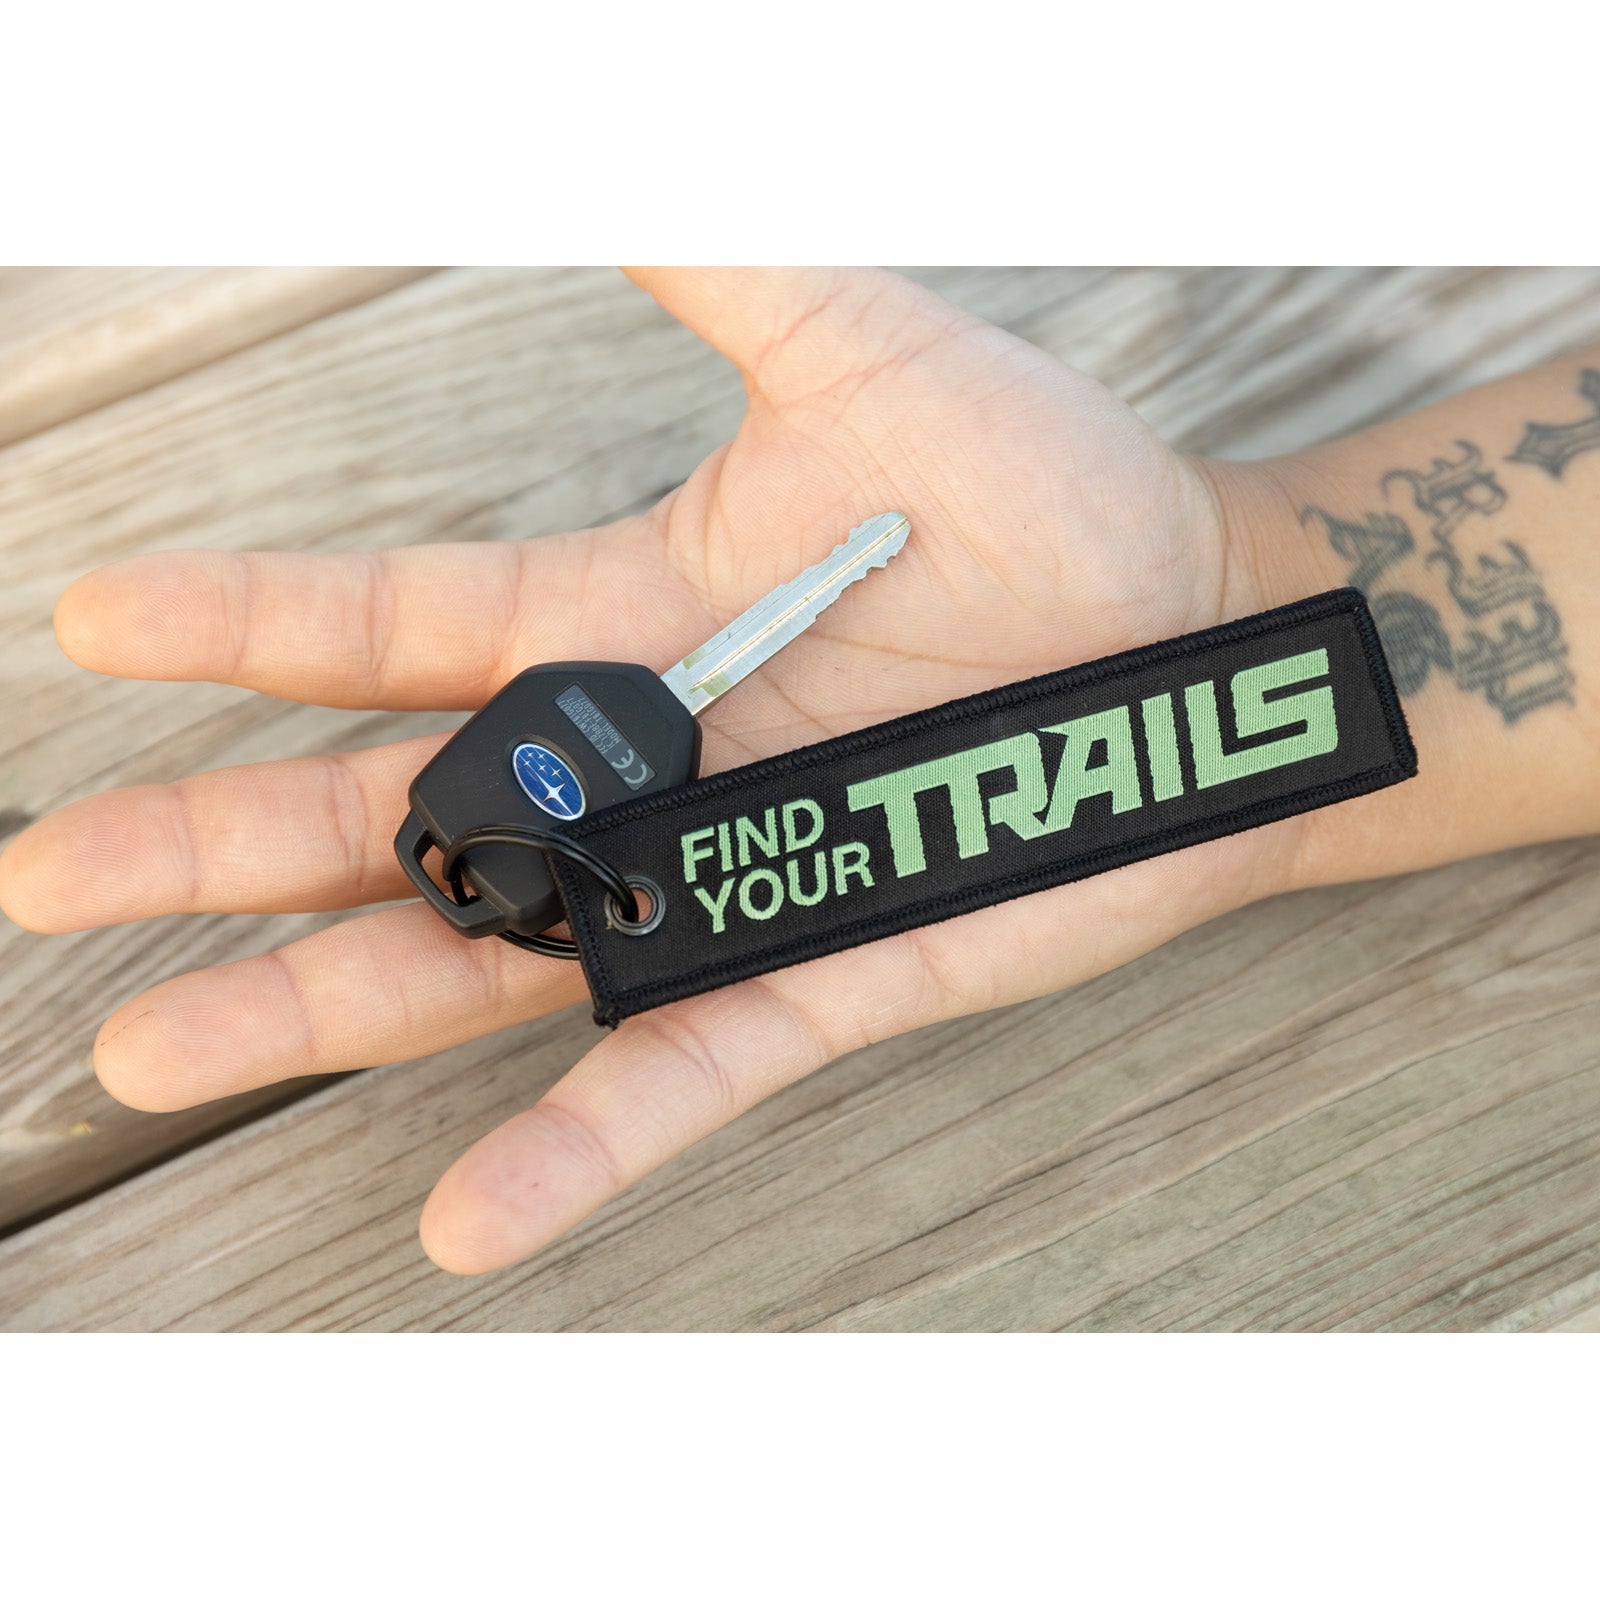 TRAILS by GrimmSpeed Jet Tag - Find Your TRAILS